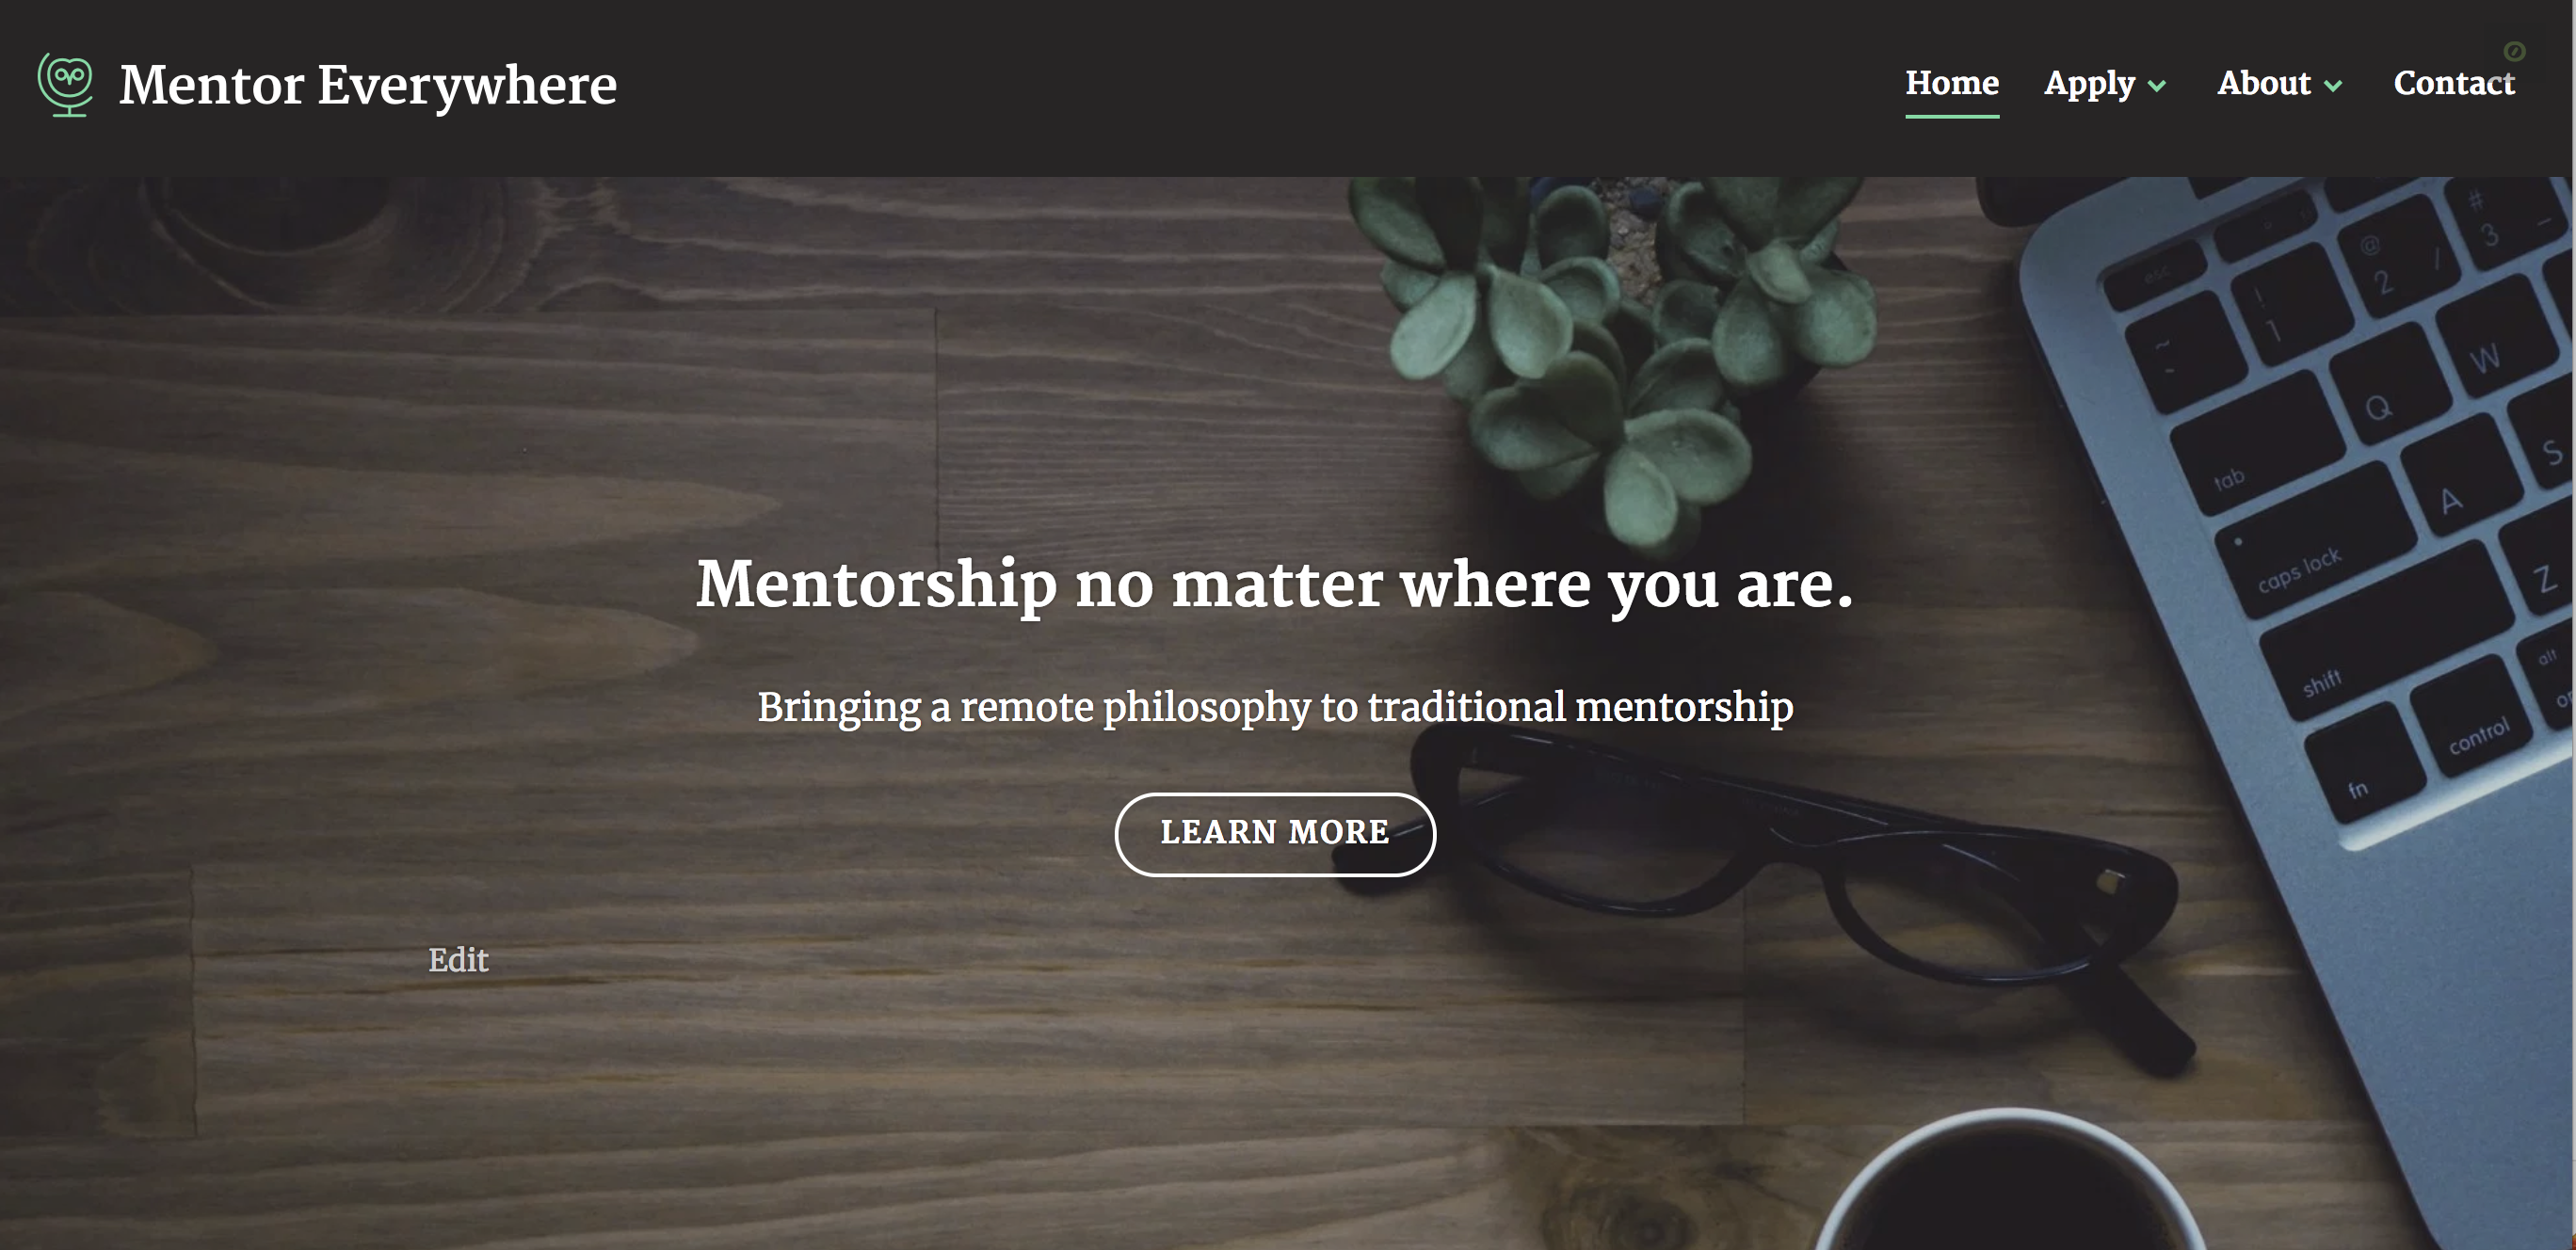 Lessons Learned from Founding a Remote Mentorship Program: Mentor
Everywhere